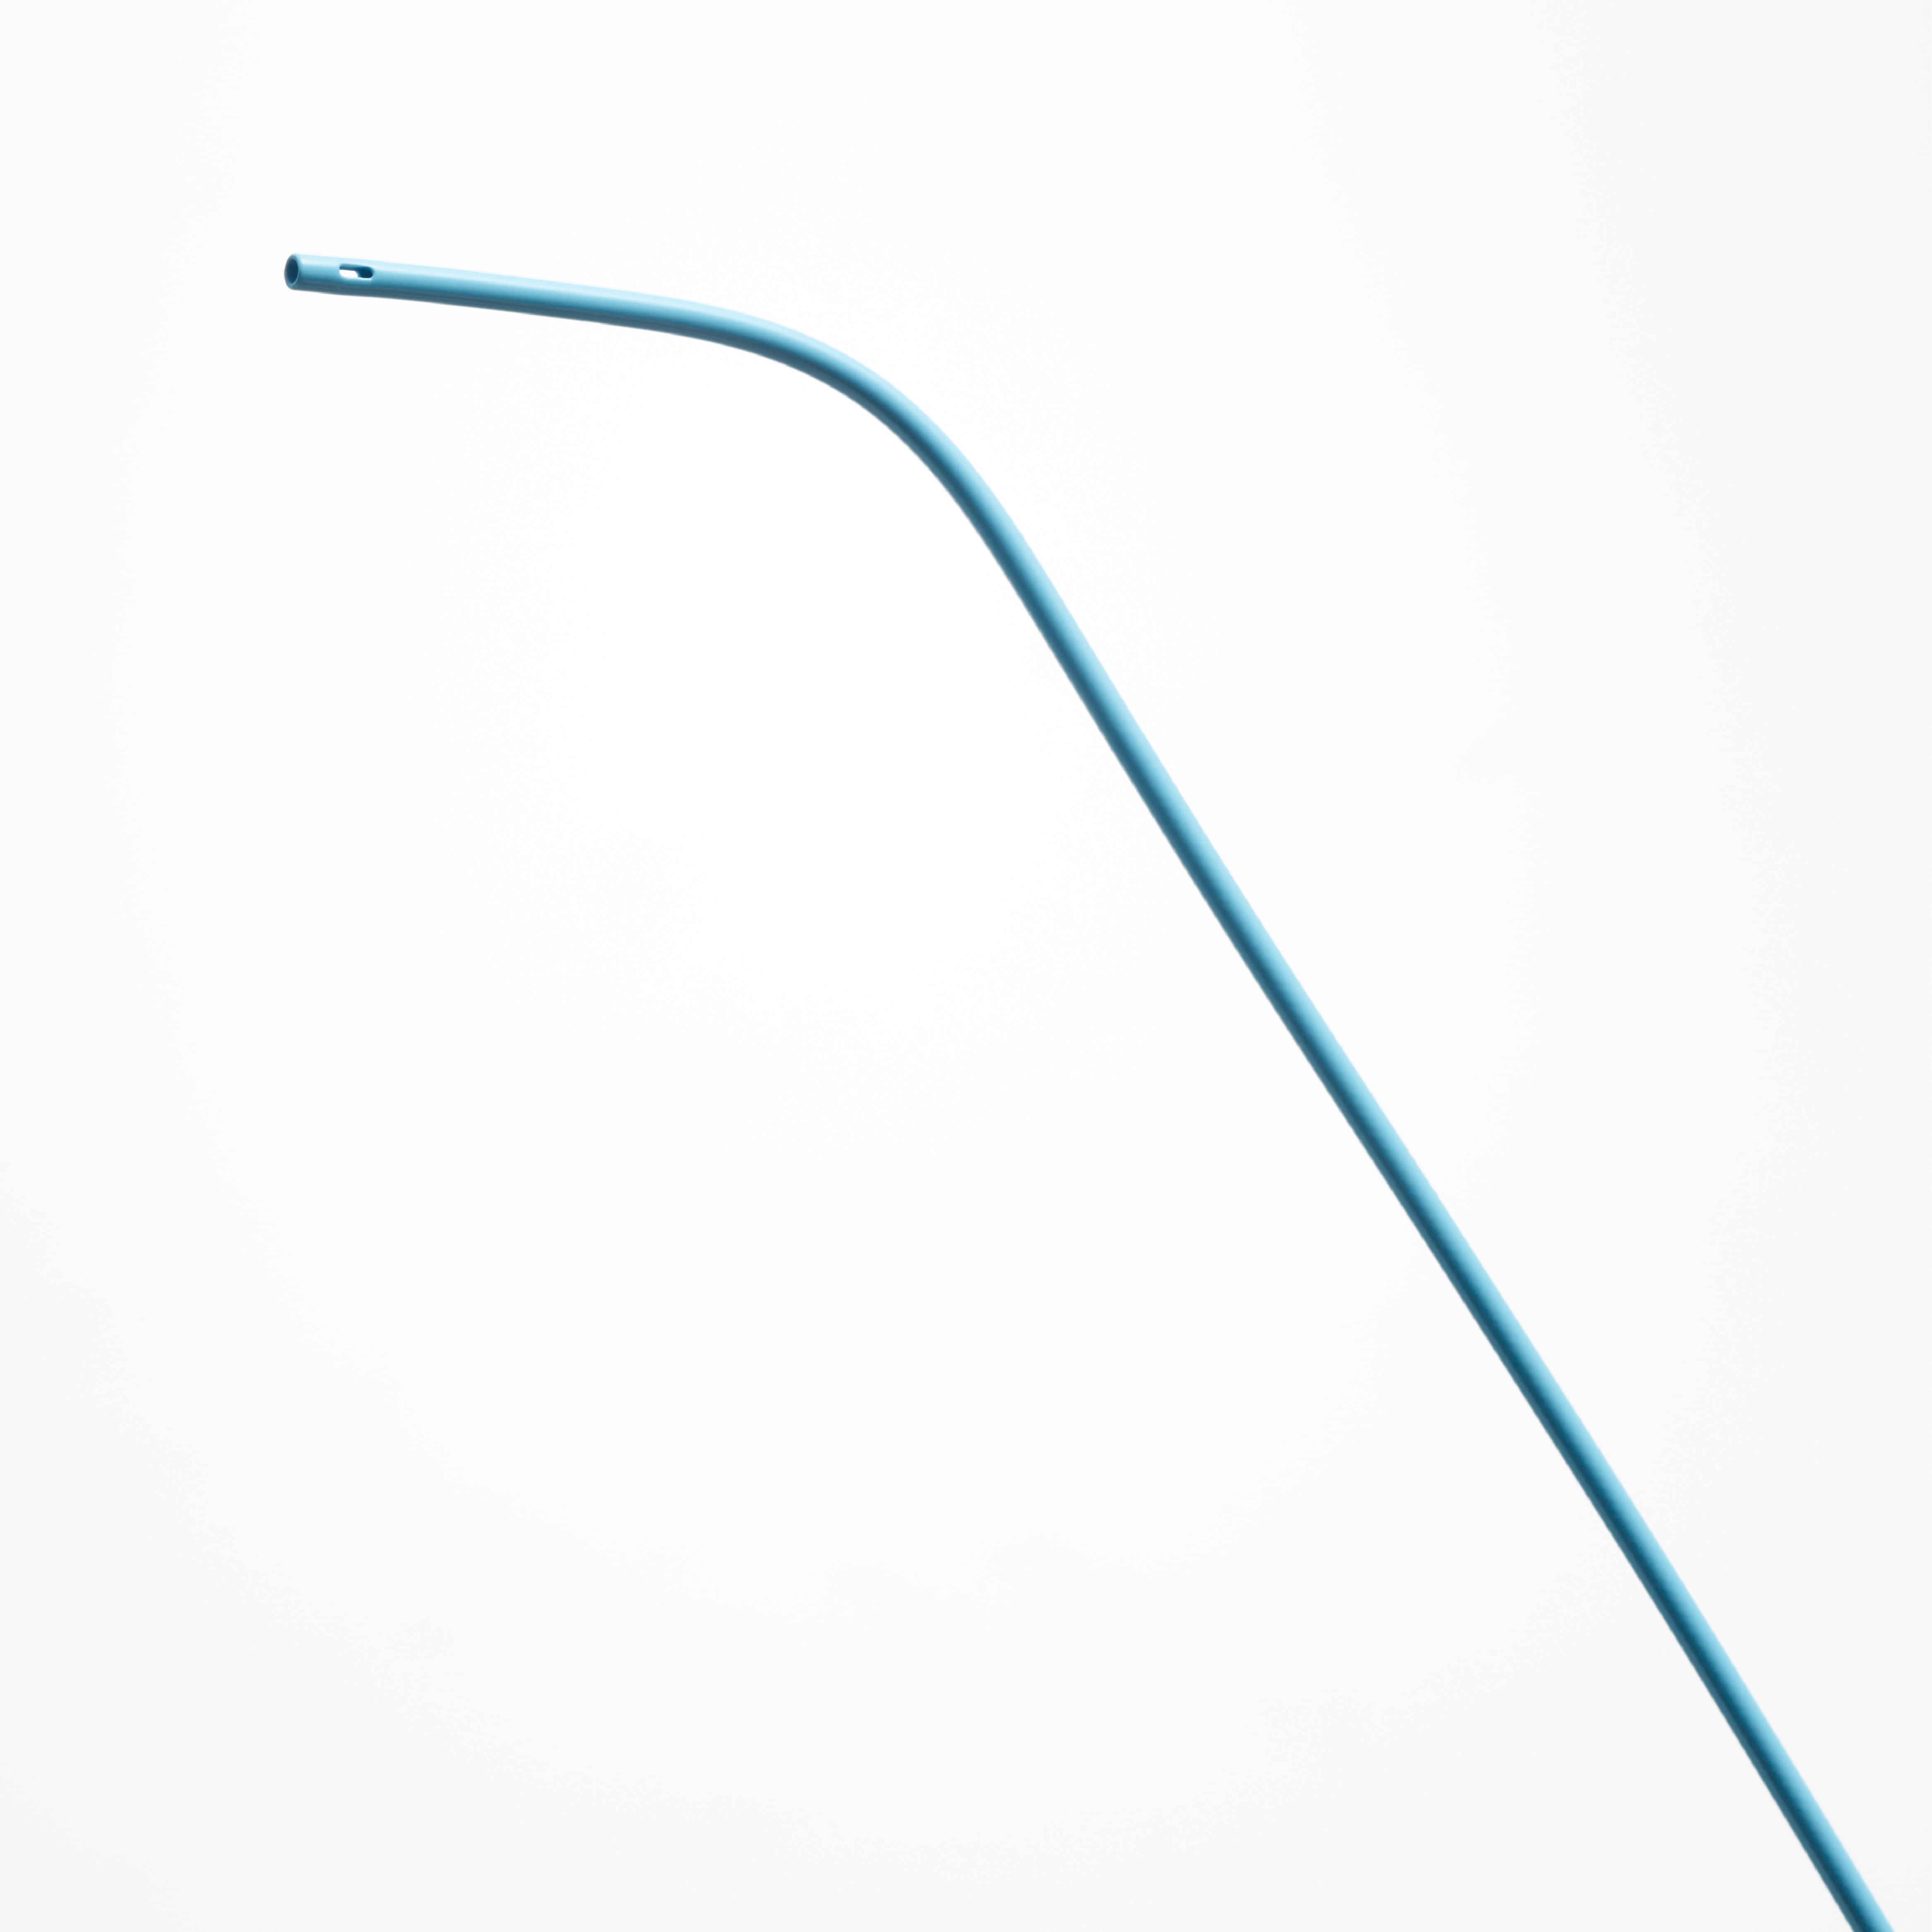 products_detail_main_angiographic_catheter_560x560.jpg